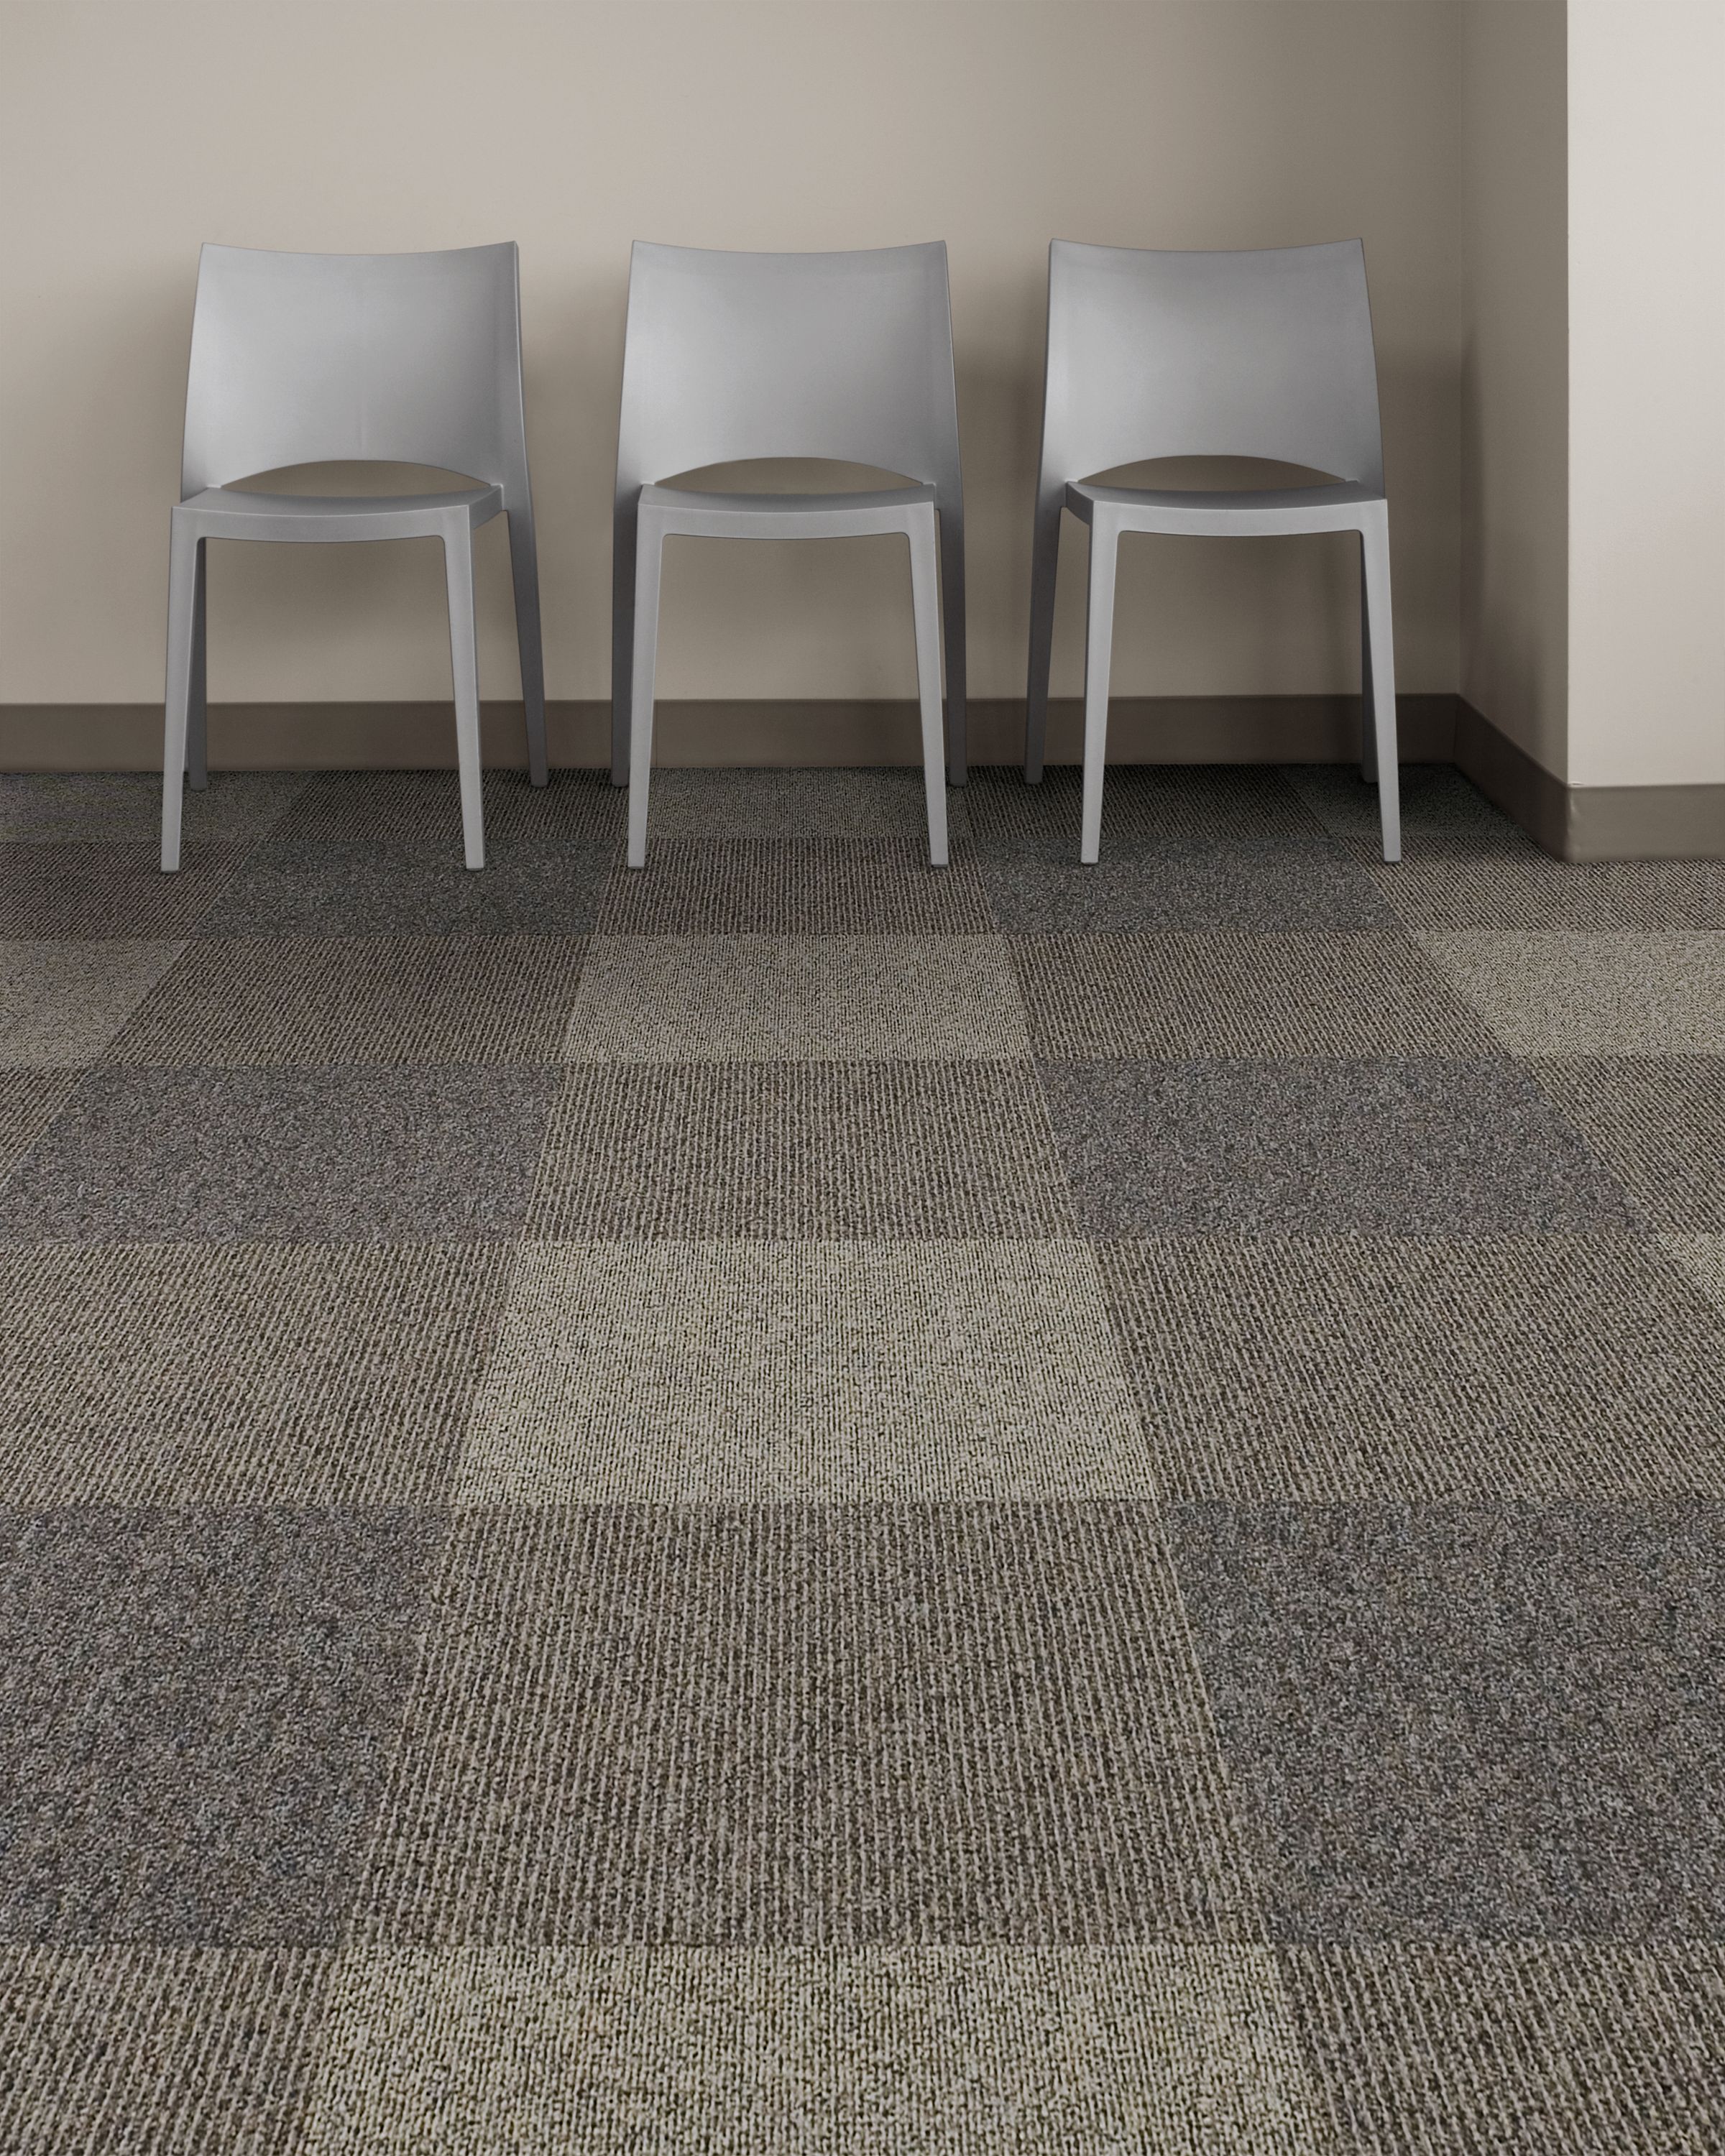 Interface Broomed, Grooved and Brushed carpet tile in room with three chairs numéro d’image 6